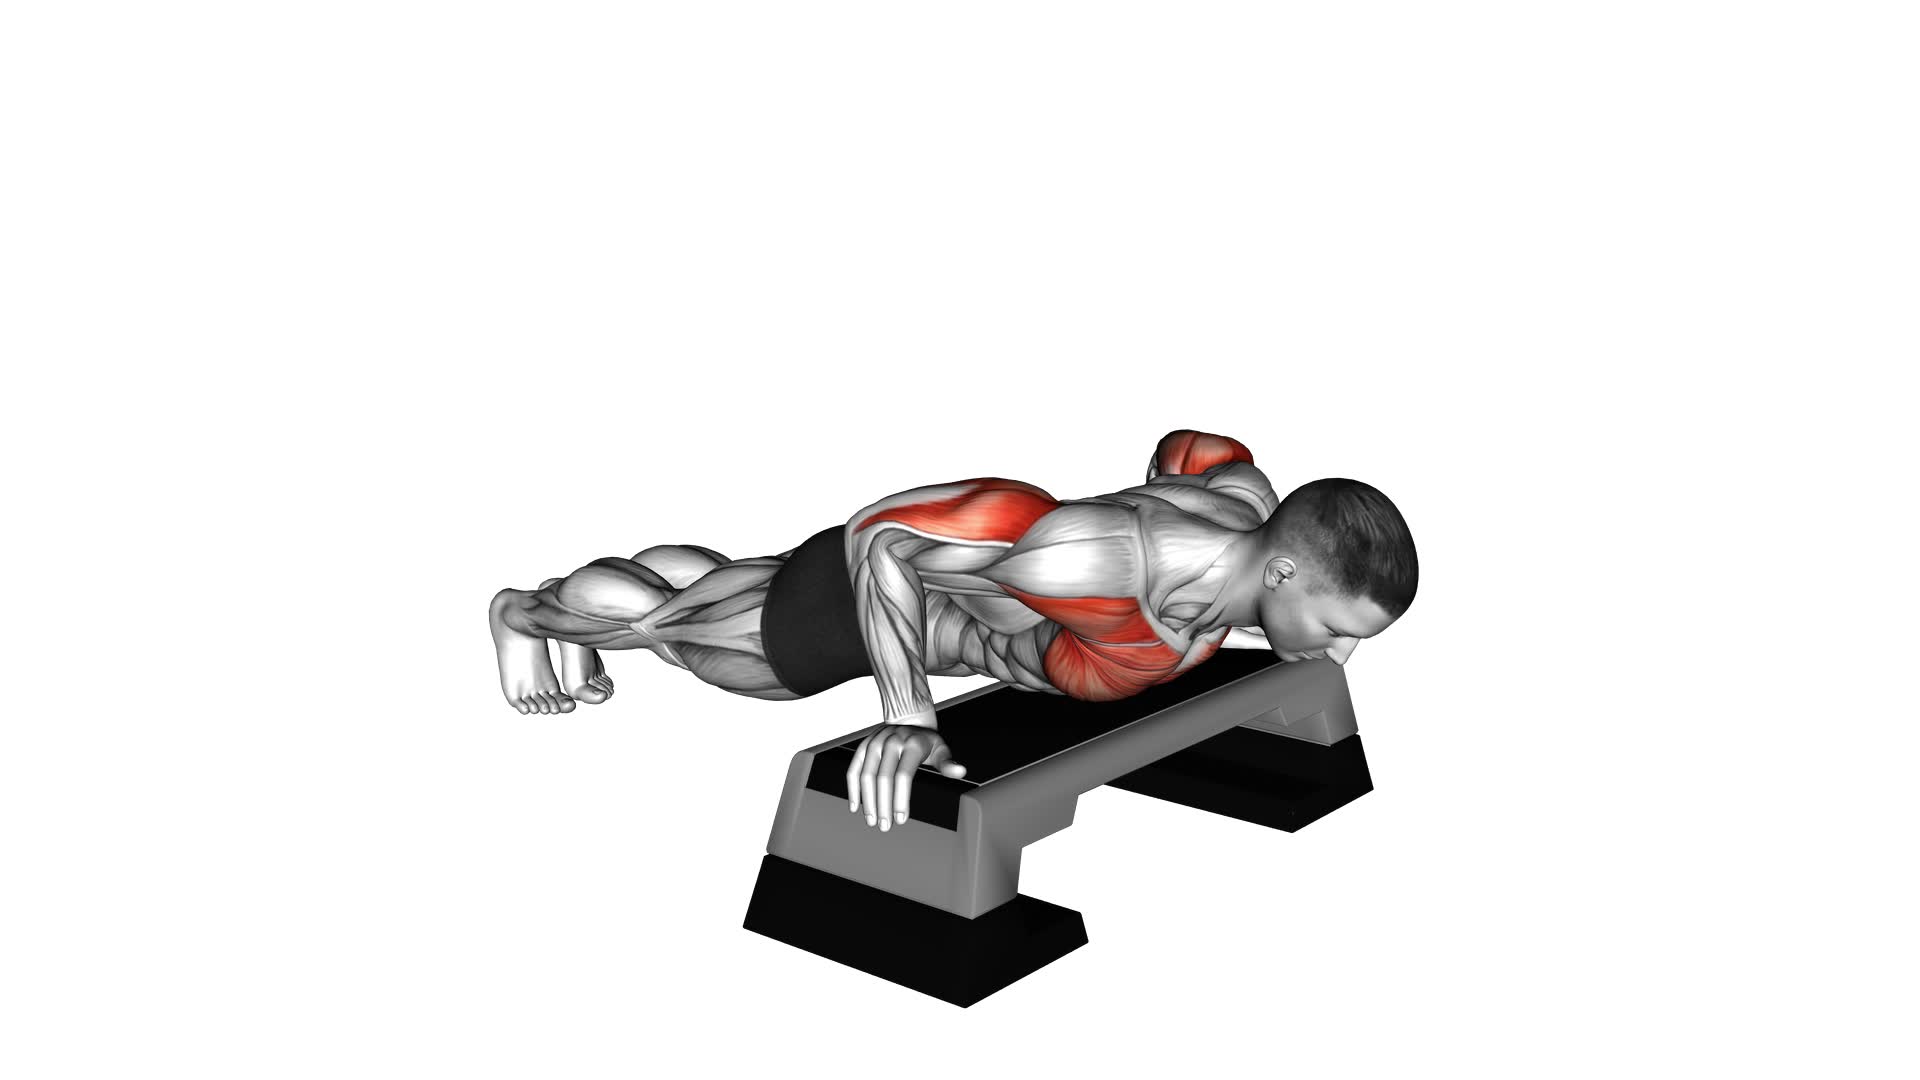 Incline Push-up - Video Exercise Guide & Tips